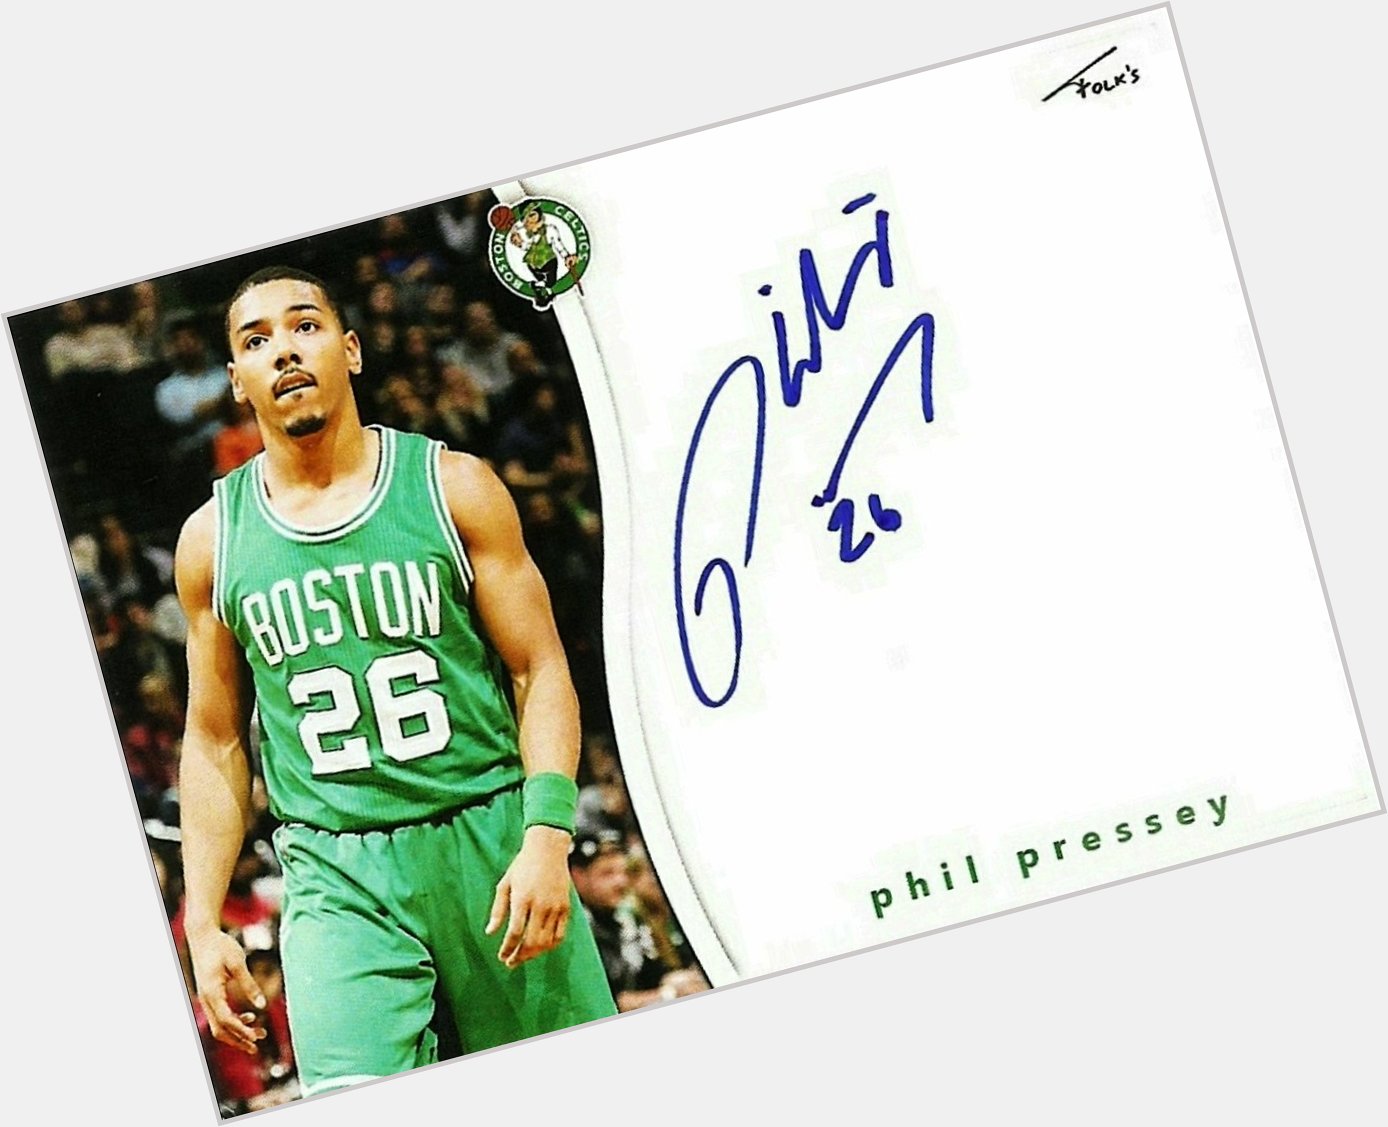 Double birthday in today! Happy Birthday to Phil Pressey who turns 27, enjoy your day 